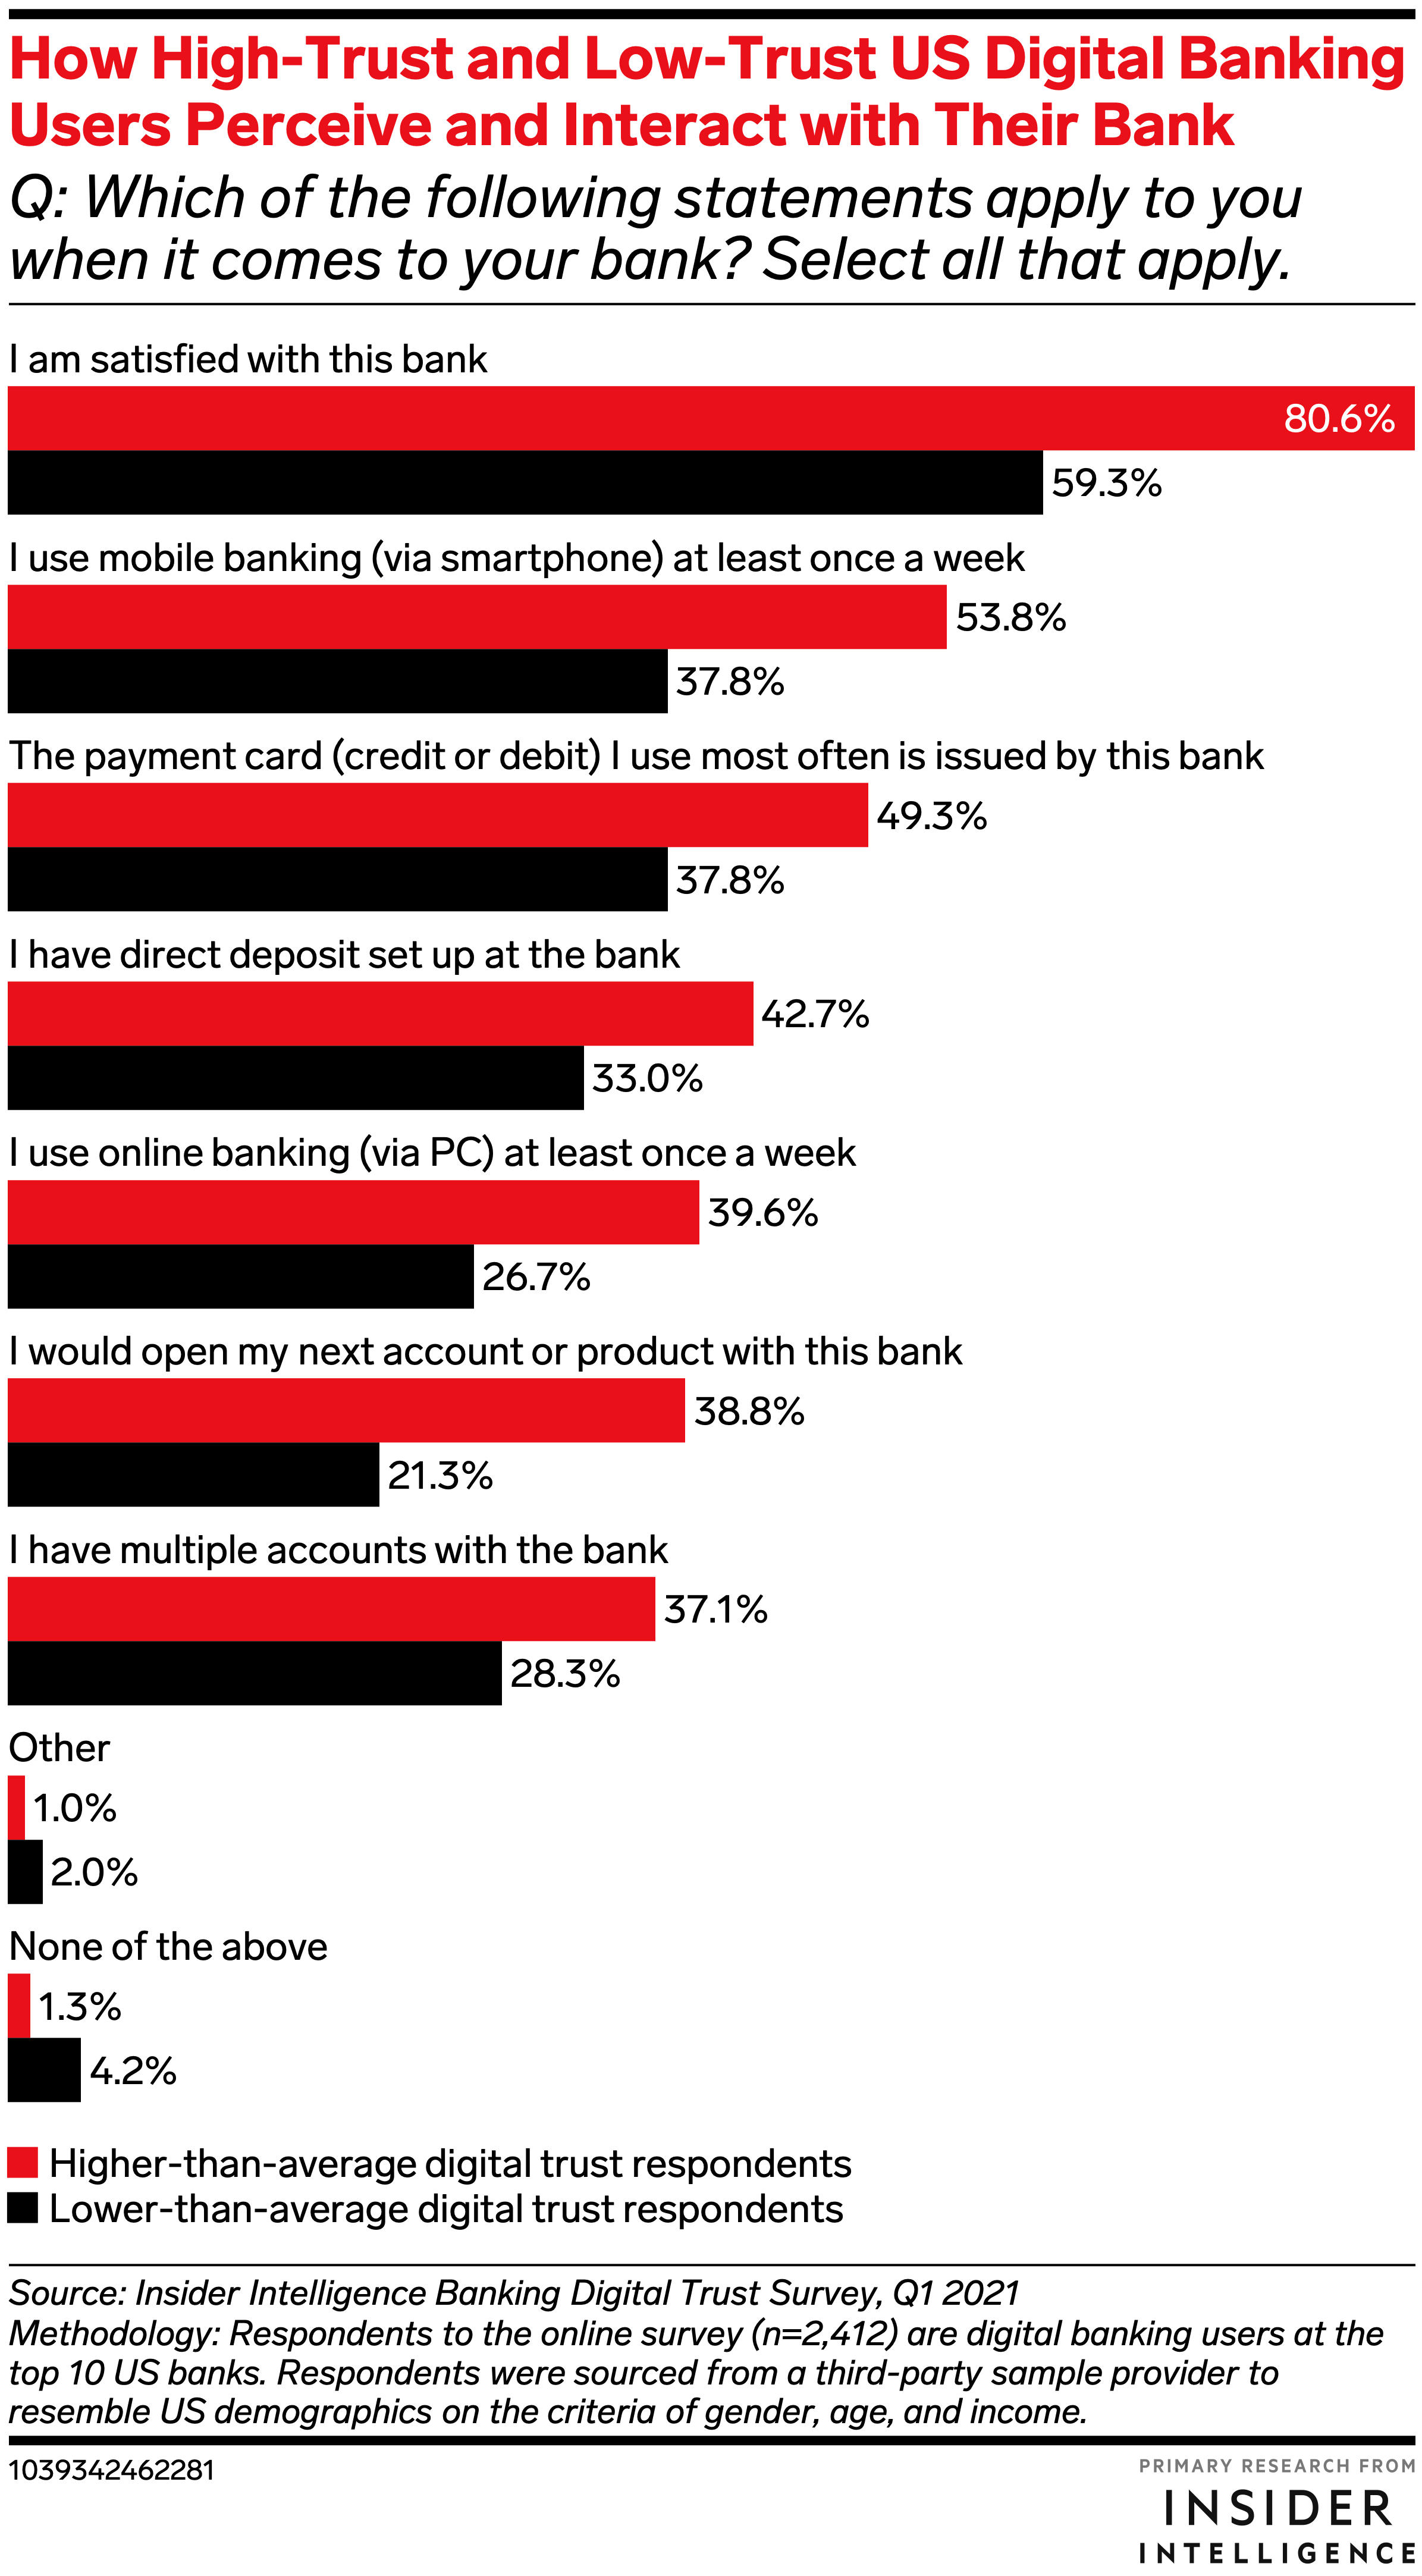 How High-Trust and Low-Trust US Digital Banking Users Perceive and Interact with Their Bank